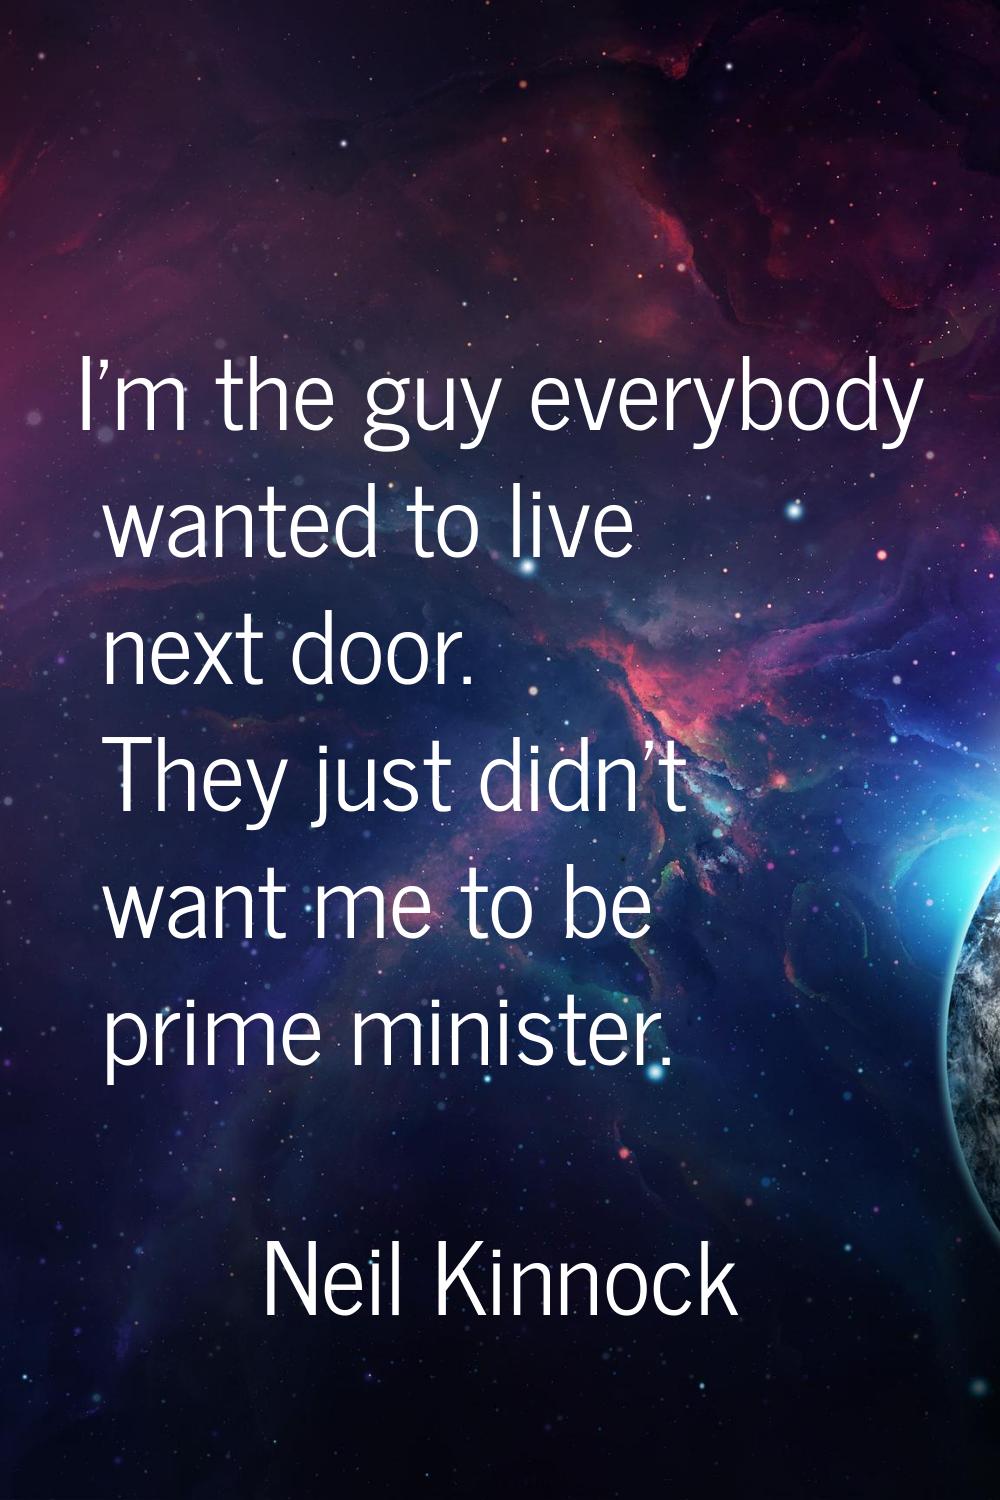 I'm the guy everybody wanted to live next door. They just didn't want me to be prime minister.